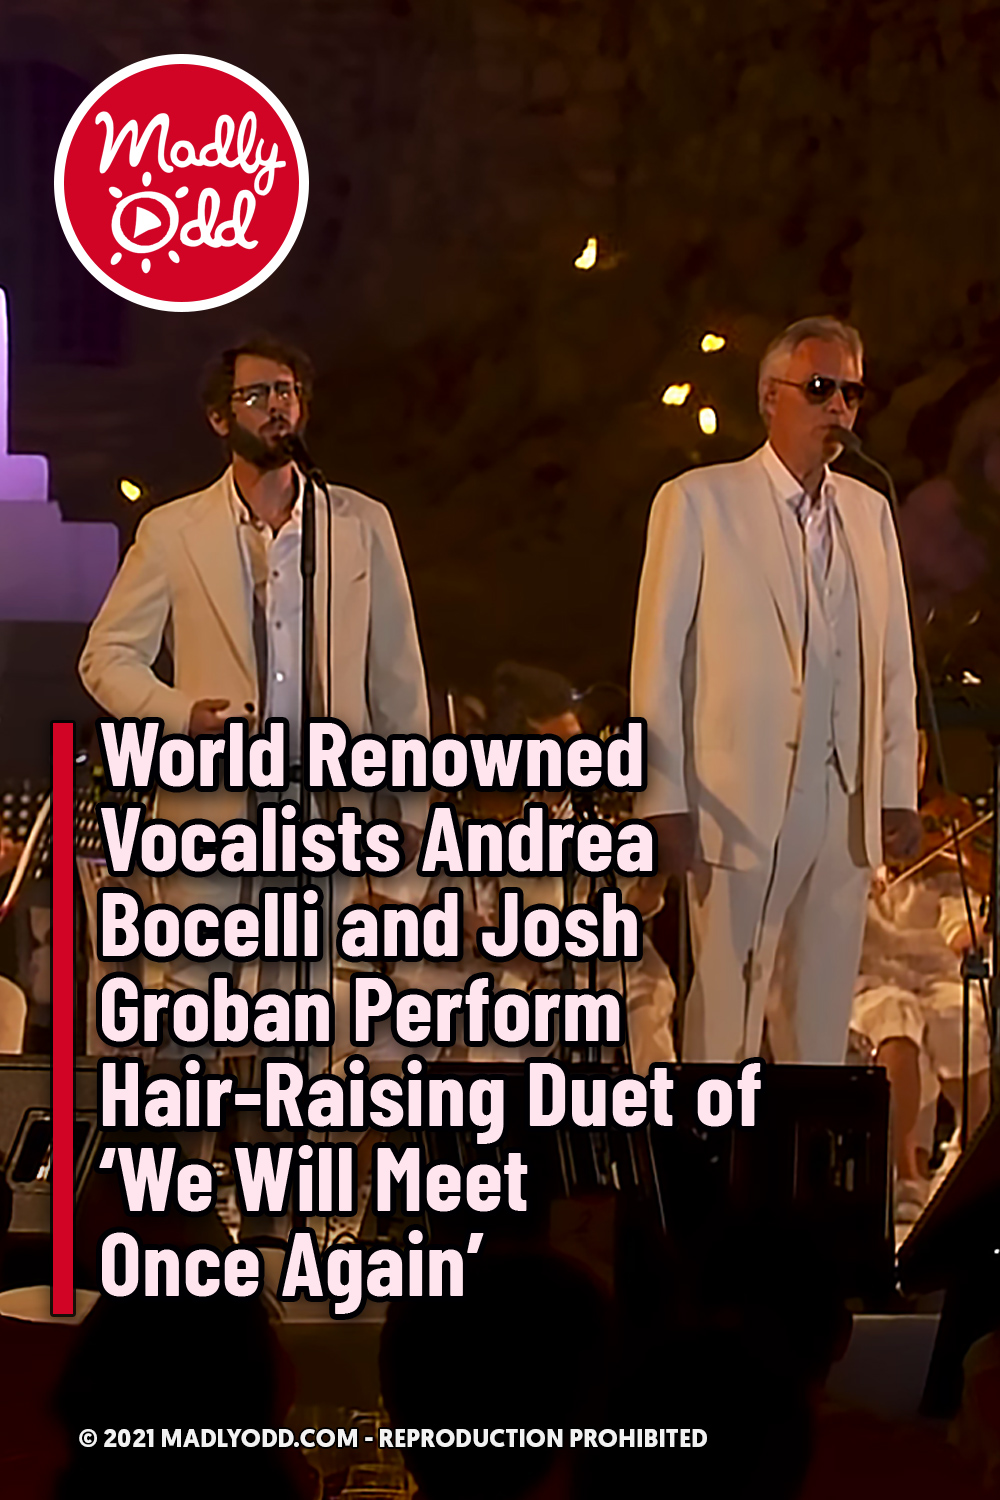 World Renowned Vocalists Andrea Bocelli and Josh Groban Perform Hair-Raising Duet of \'We Will Meet Once Again\'